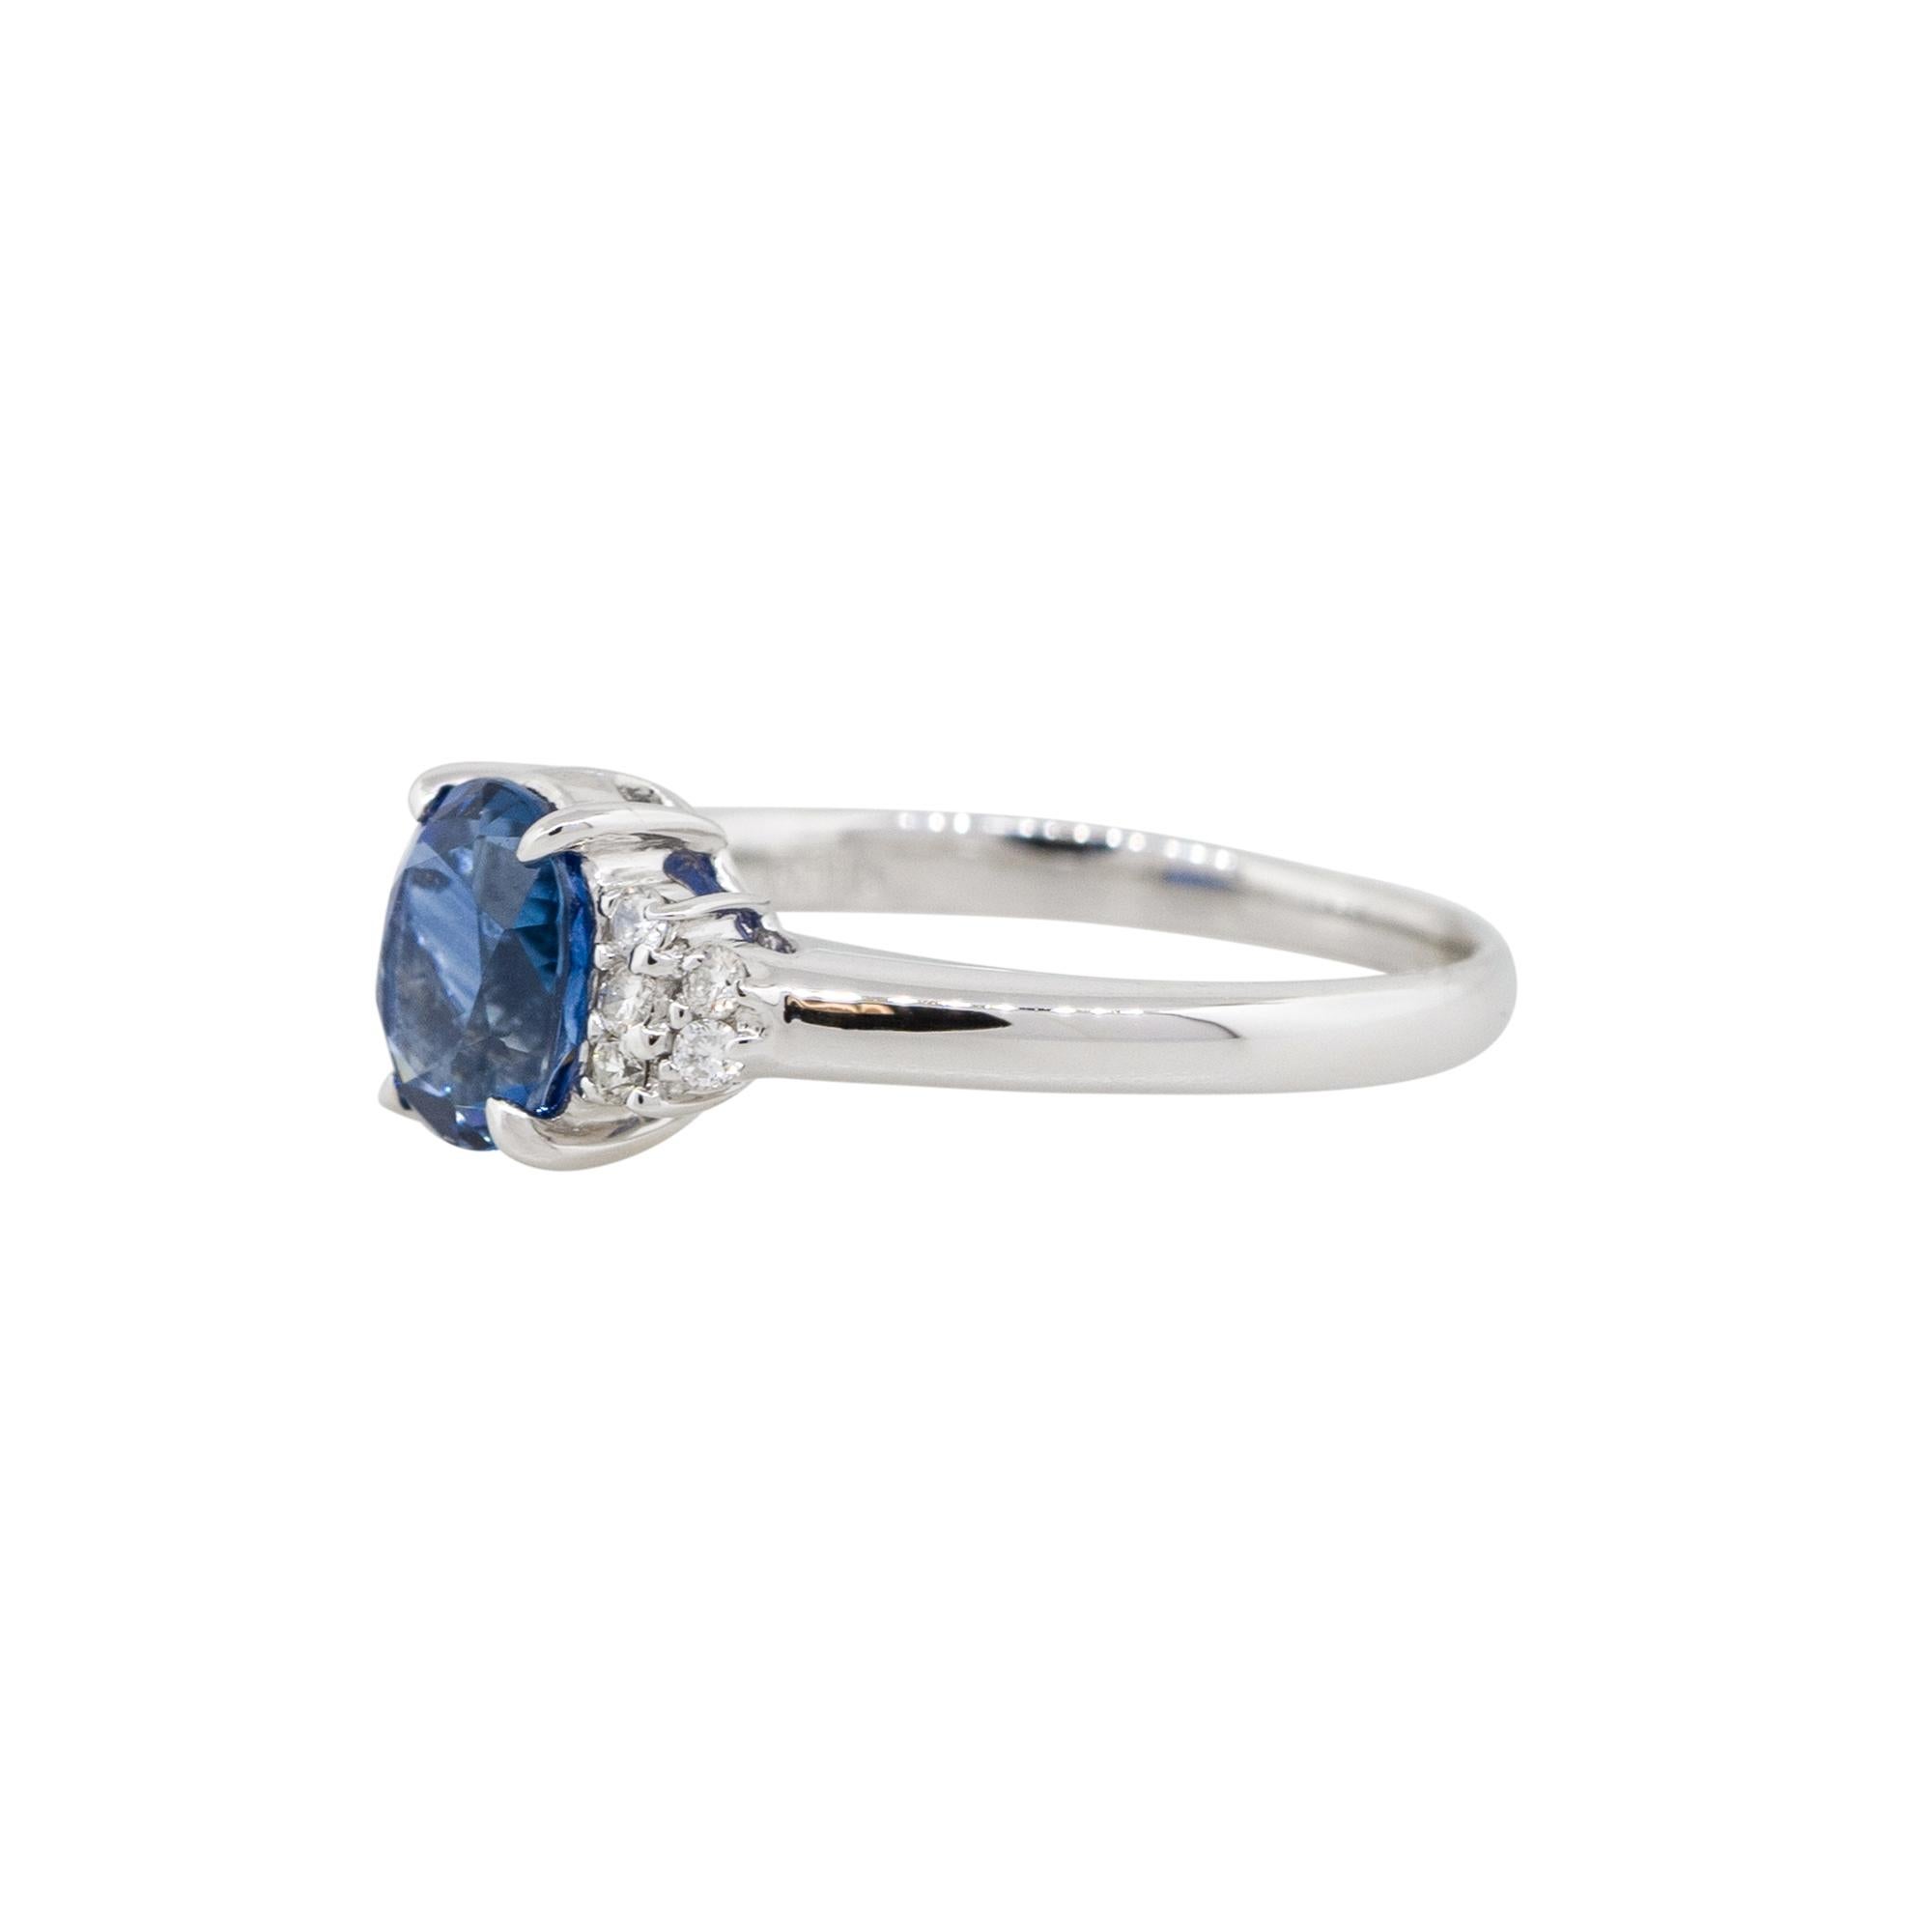 Material: Platinum
Gemstone details: Approx. 1.58ctw oval shaped Sapphire gemstone
Diamond details: Approx. 0.11ctw of round cut diamonds. Diamonds are G/H in color and VS in clarity
Ring Size: 5.75   
Ring Measurements: 0.75